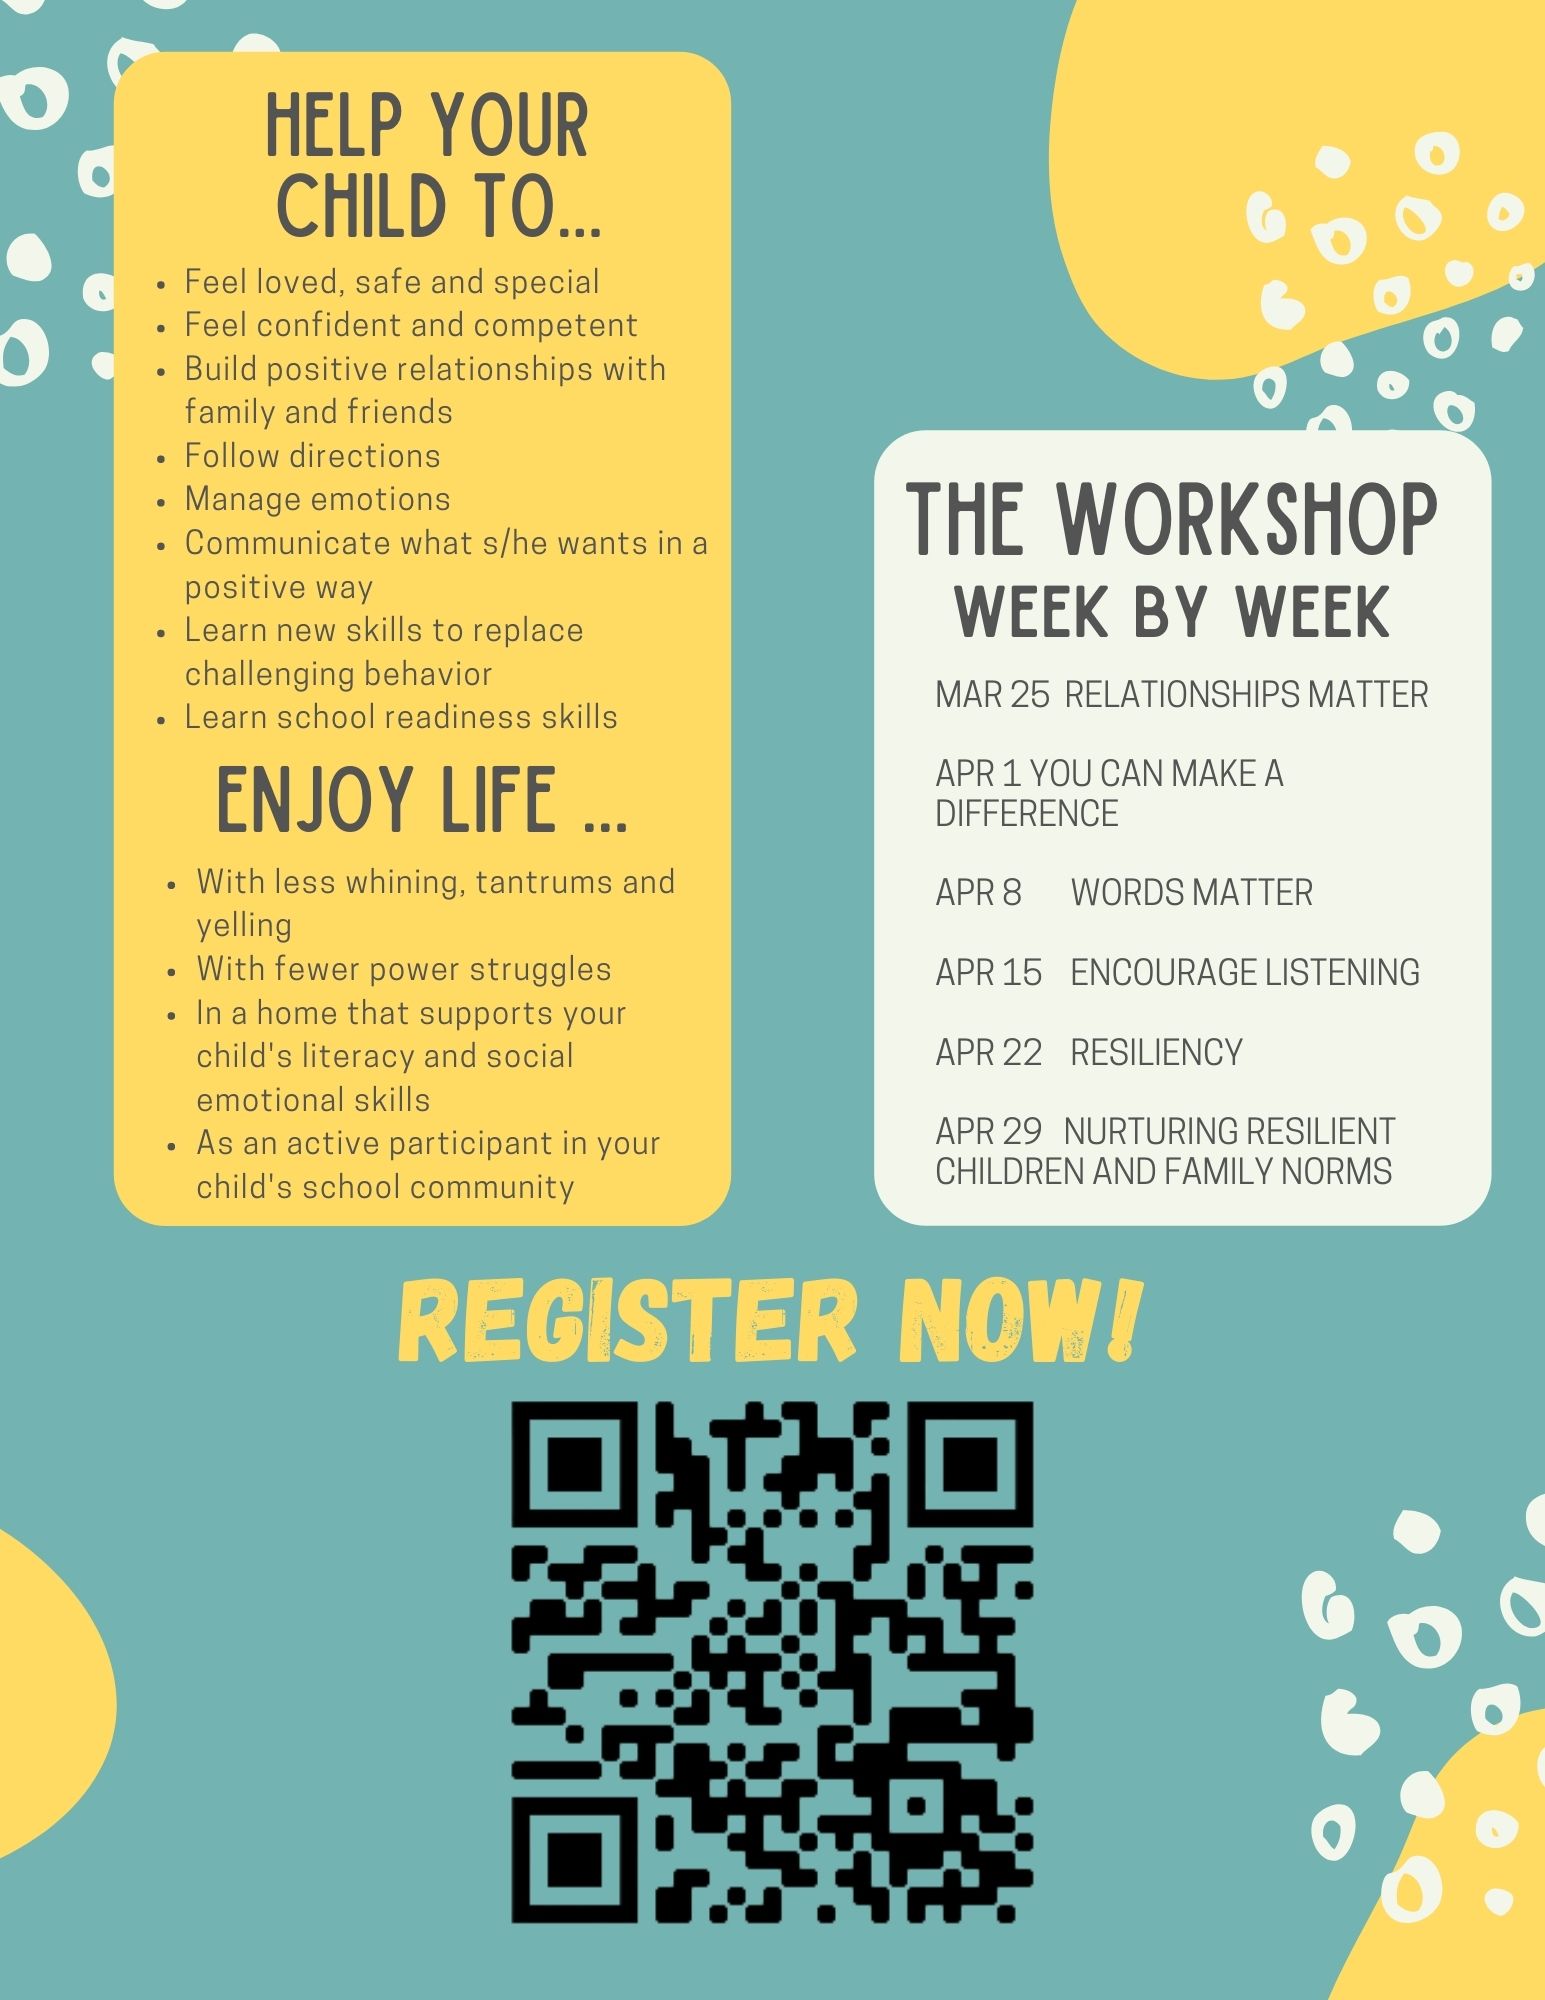 Dates and topics of workshop: MAR 25 RELATIONSHIPS MATTER, APRIL 1 YOU CAN MAKE A DIFFERENCE, APRIL 8 WORDS MATTER, APRIL 15 ENCOURAGE LISTENING, APRIL 22 RESILIENCY, APRIL 29 NURTURING RESILIENT CHILDREN AND FAMILY NORMS 